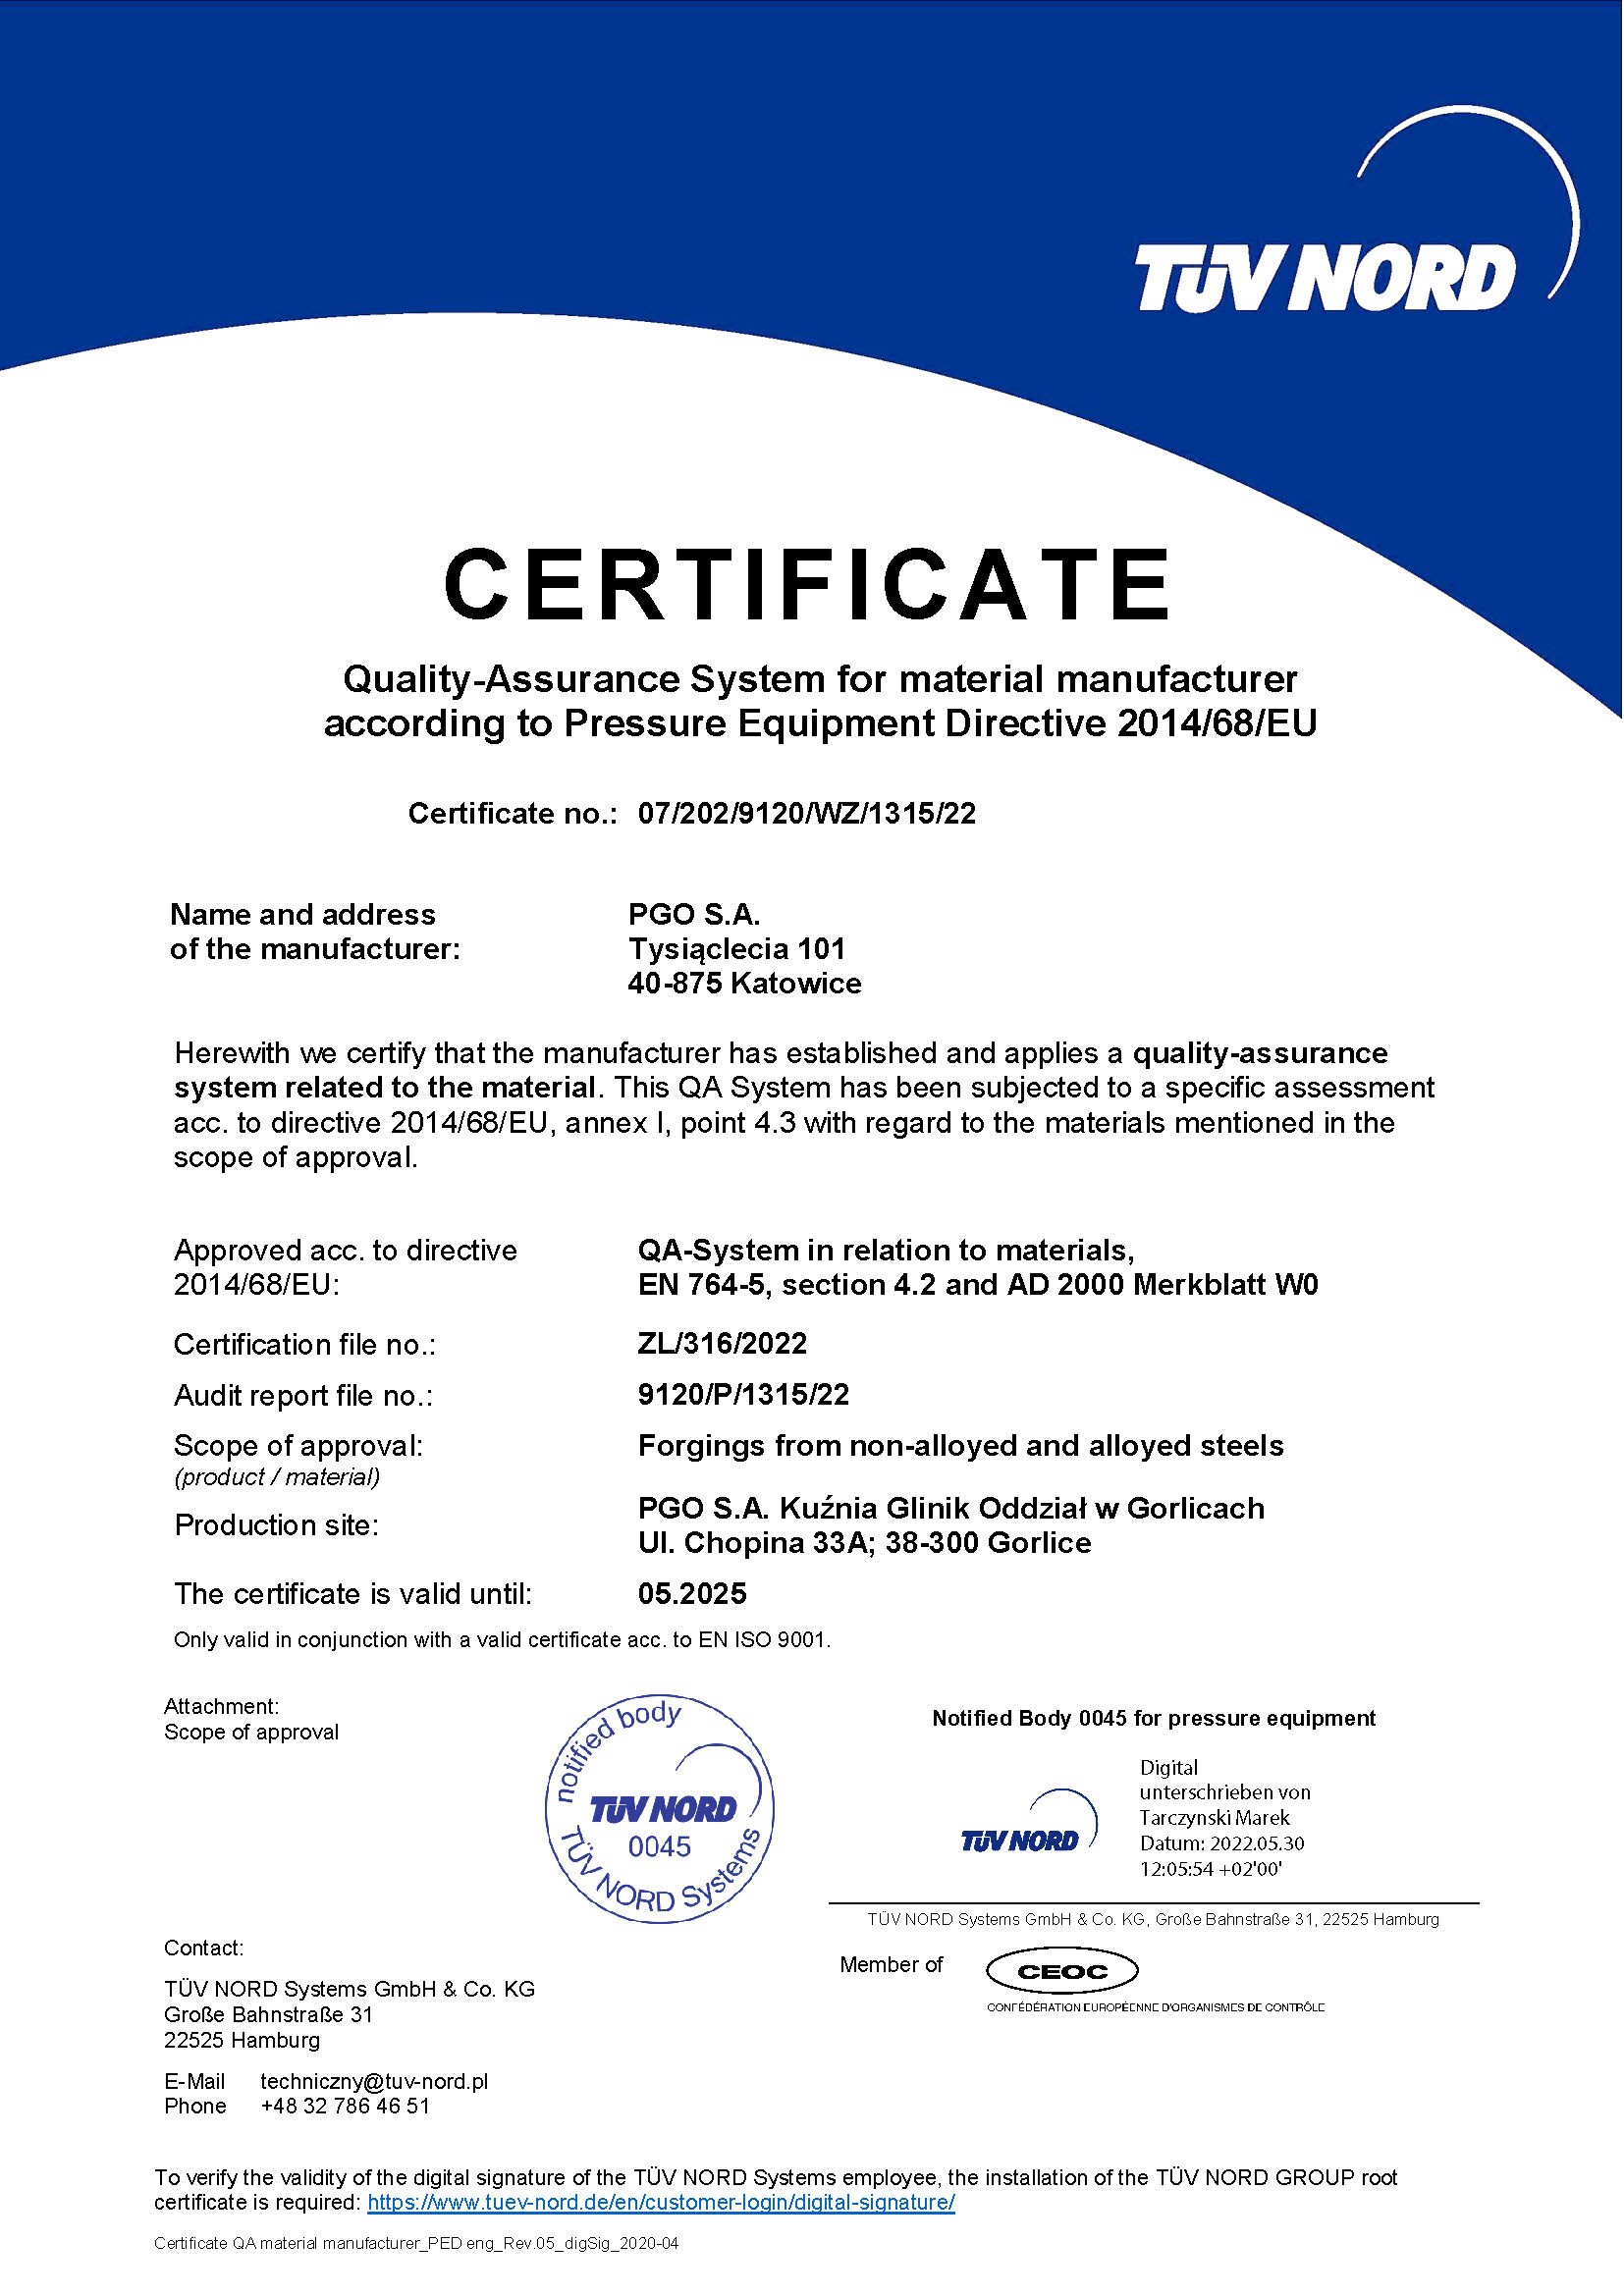 Certificate Quality-Assurance System for material manufacturer according to Pressure Equipment Directive 2014_68